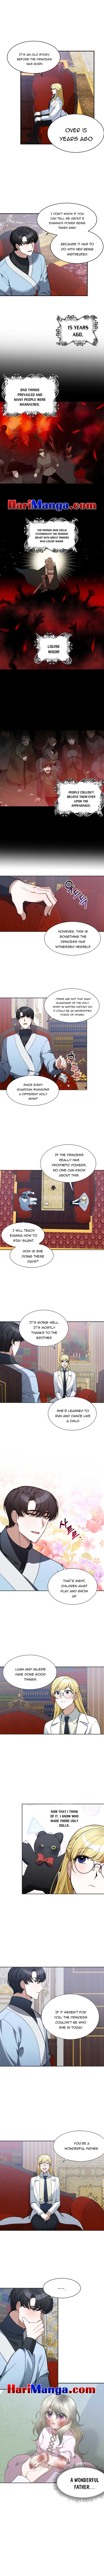 One Step Forward To The Flower Path - Page 2